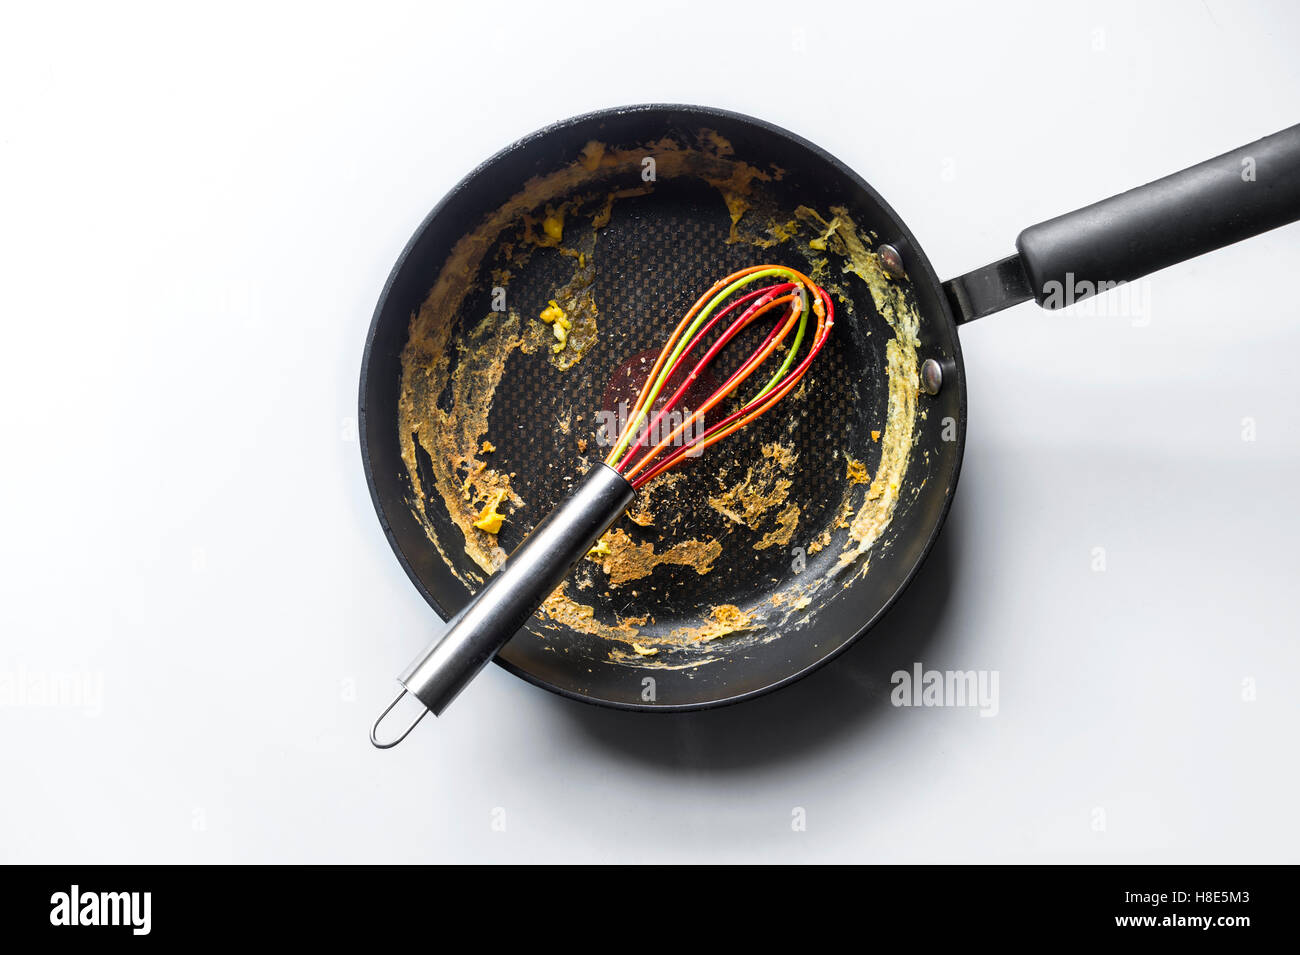 Dirty Frying Pan With Whisk Stock Photo